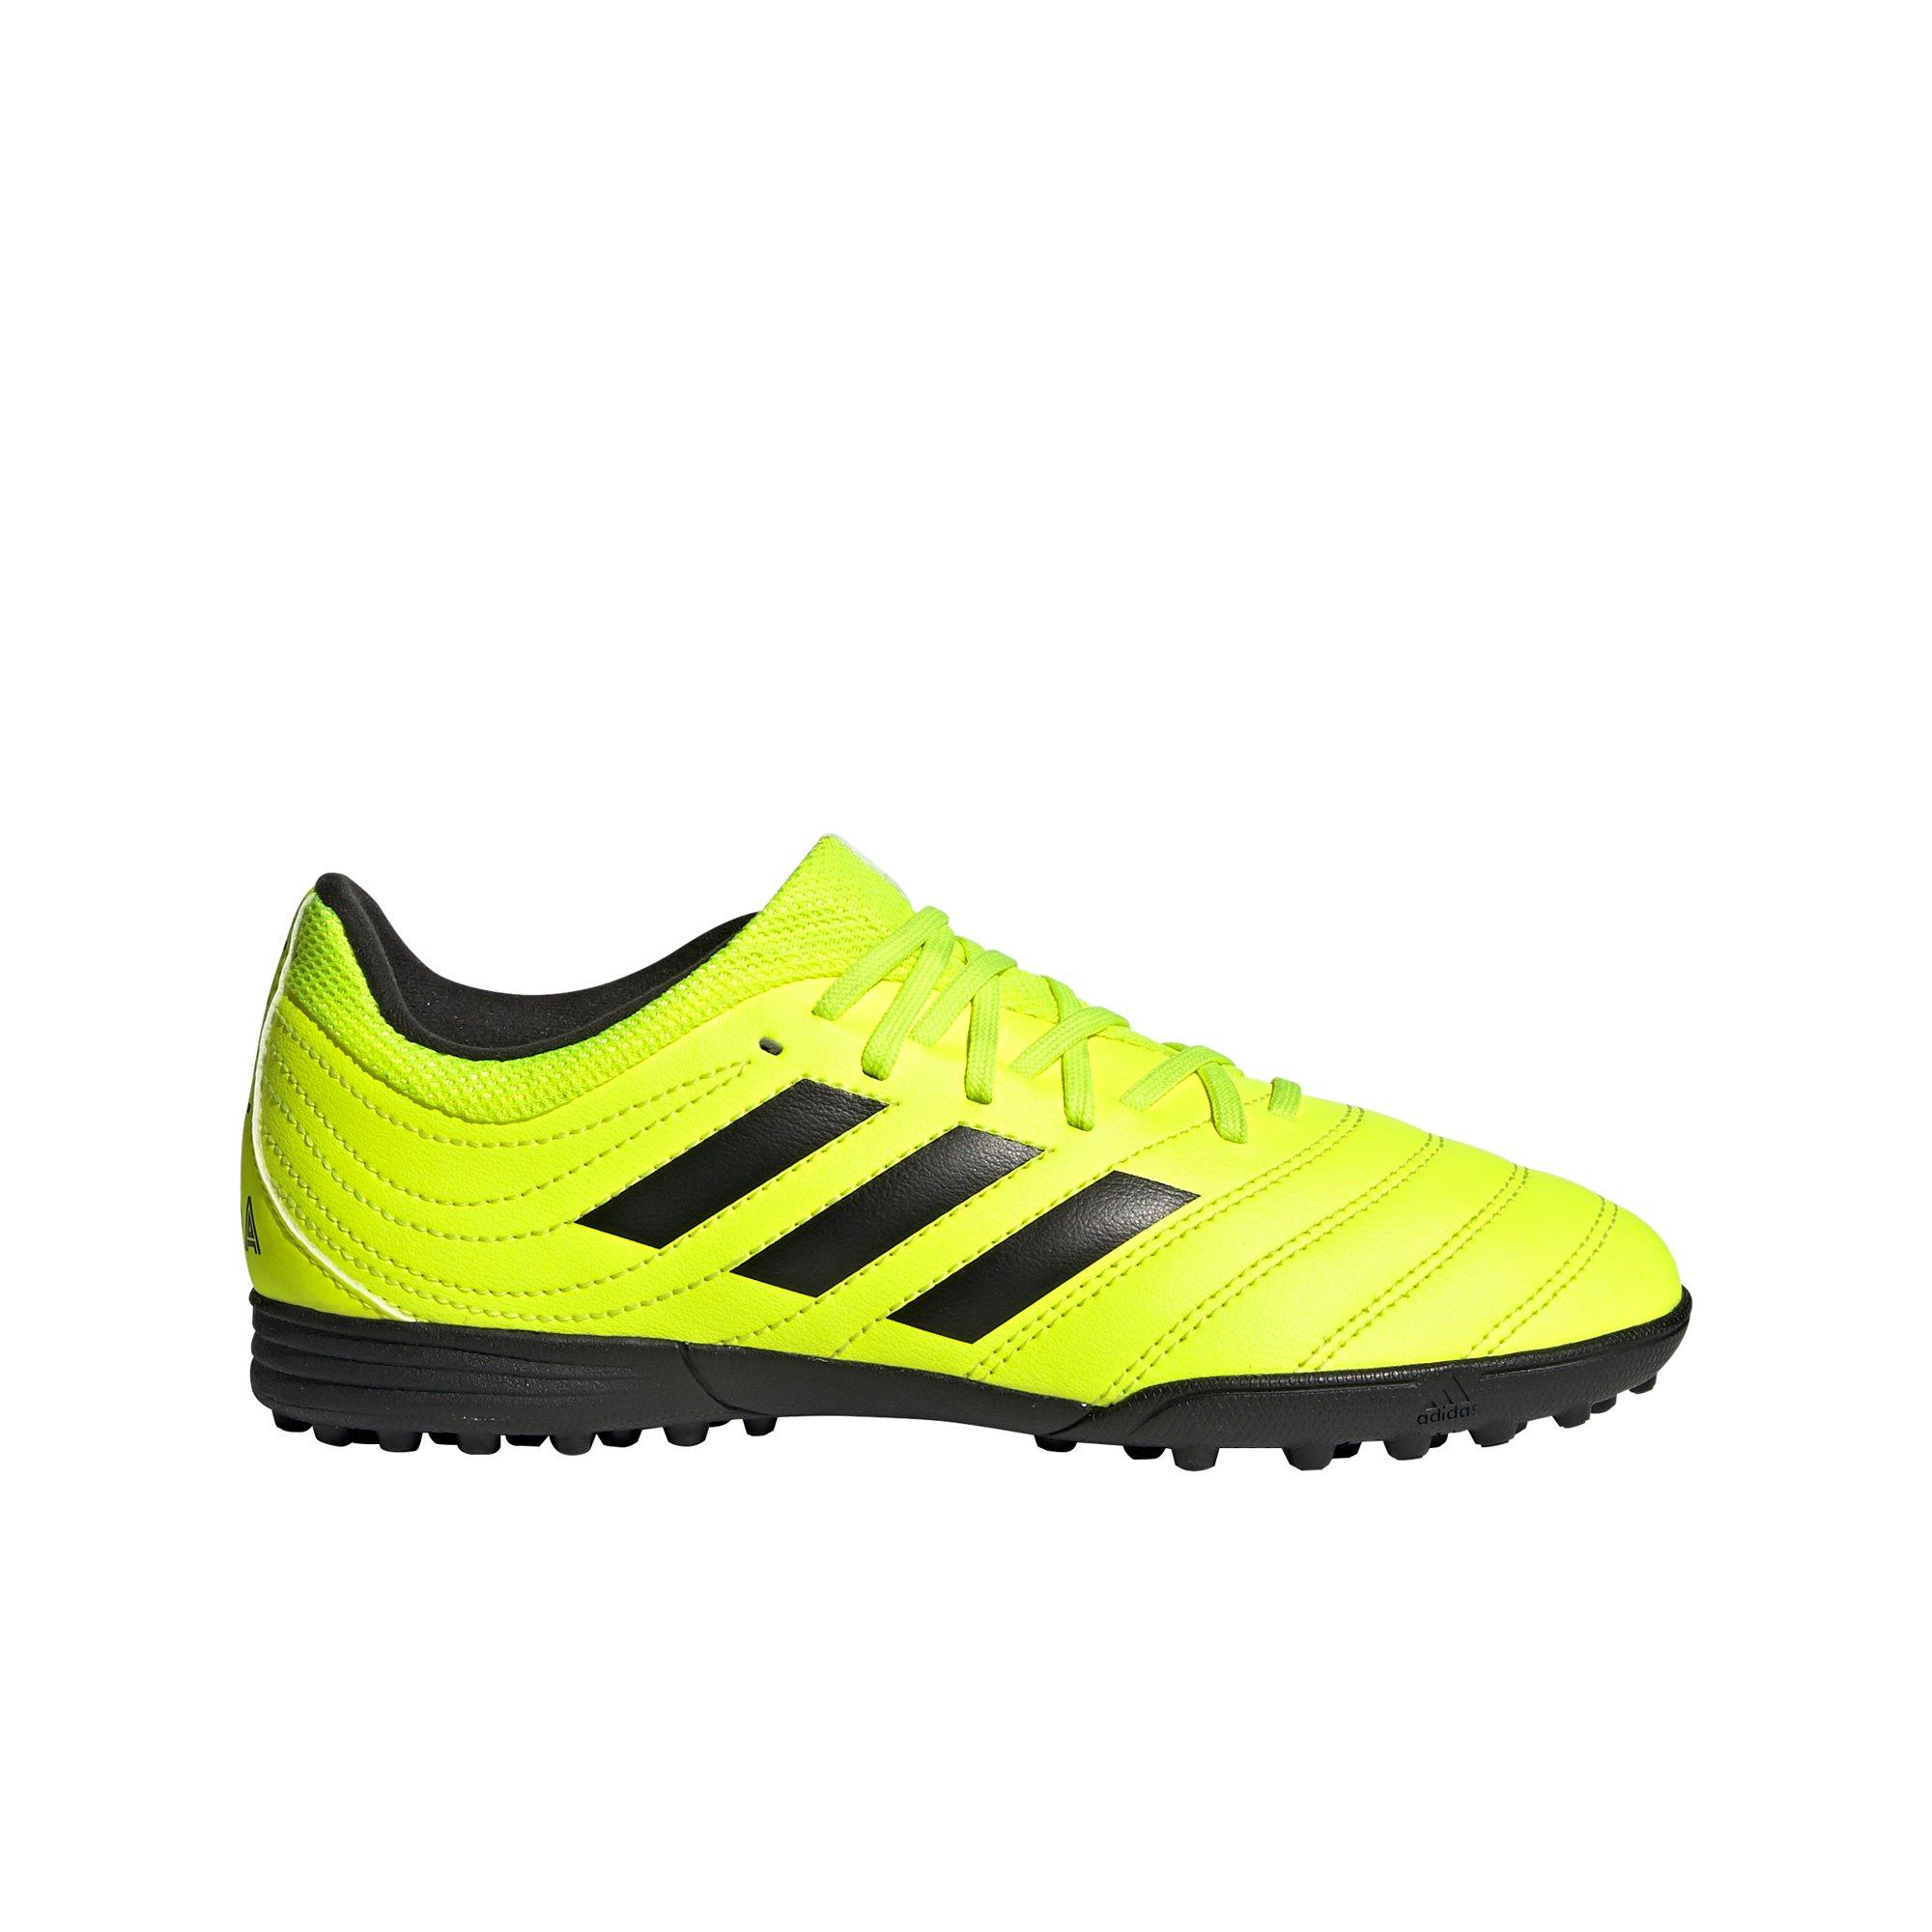 adidas copa 19.3 turf review